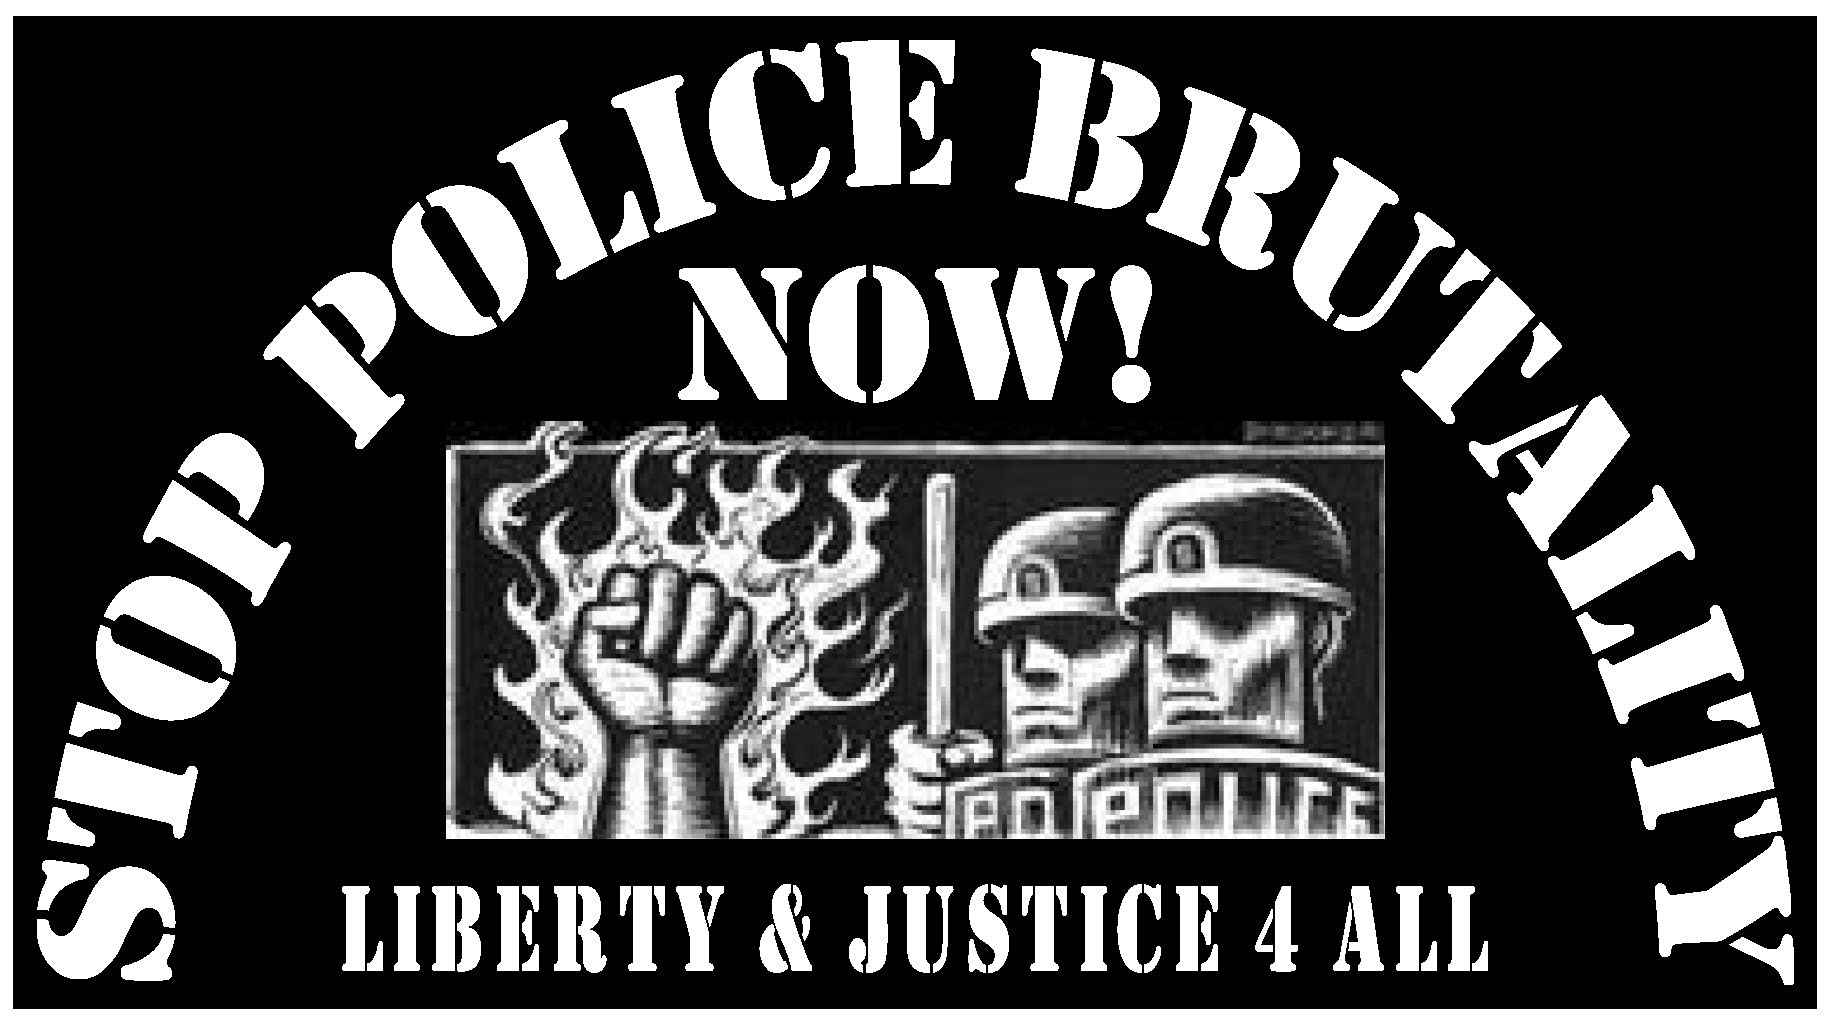 End police brutality now